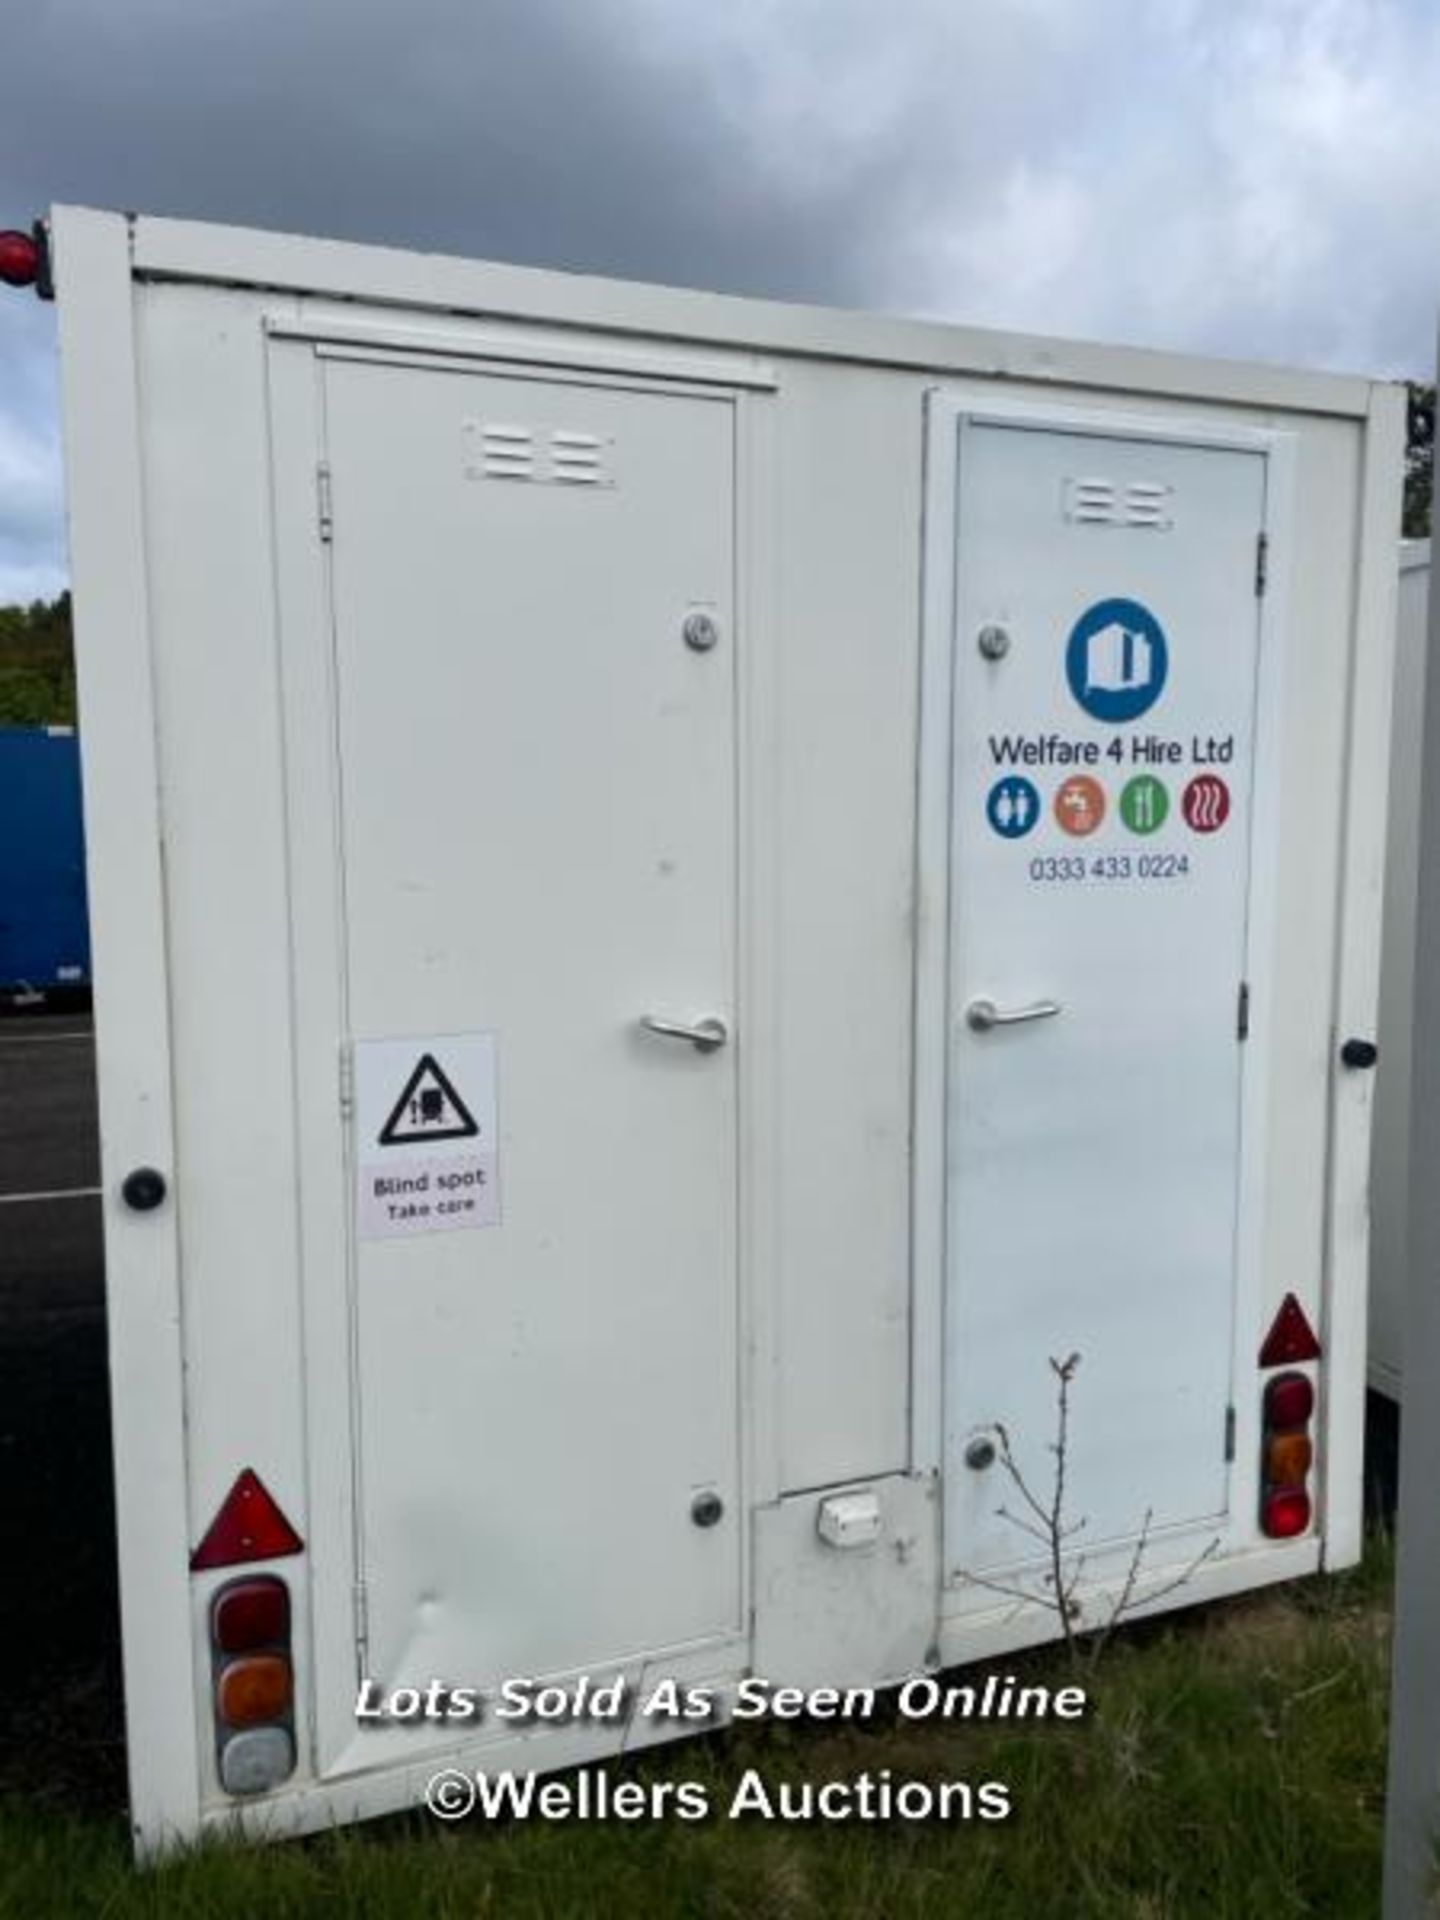 6 PERSON 12 X 7.5FT AJC EASY CABIN TOWABLE WELFARE UNIT, INCLUDES WASH BASIN, KETTLE, MICROWAVE, - Image 5 of 20